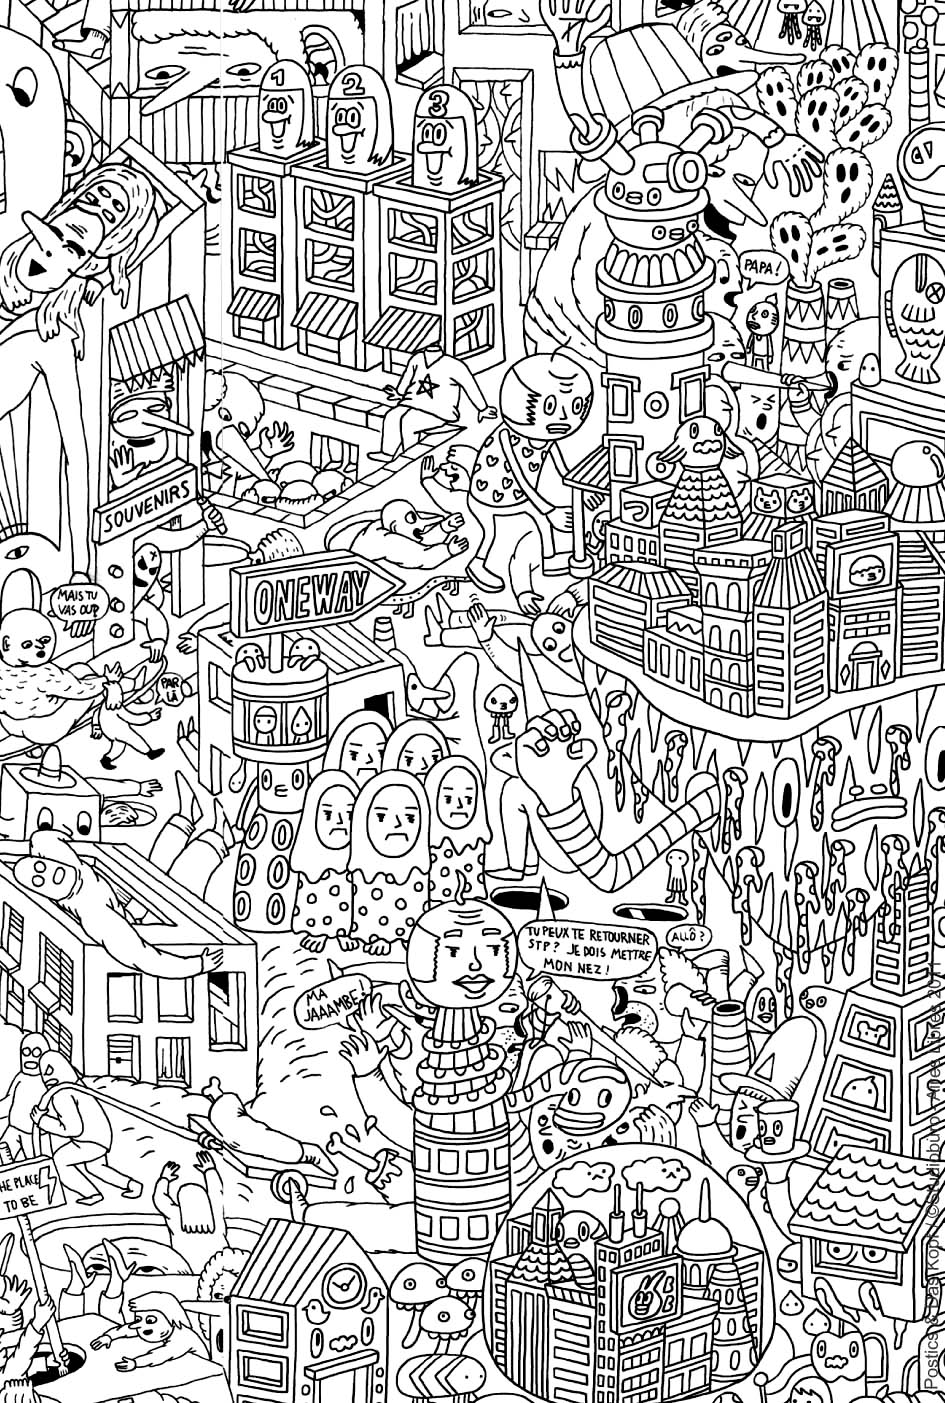 Very complex coloring page of an imaginary city with robots and other strange creatures - 3